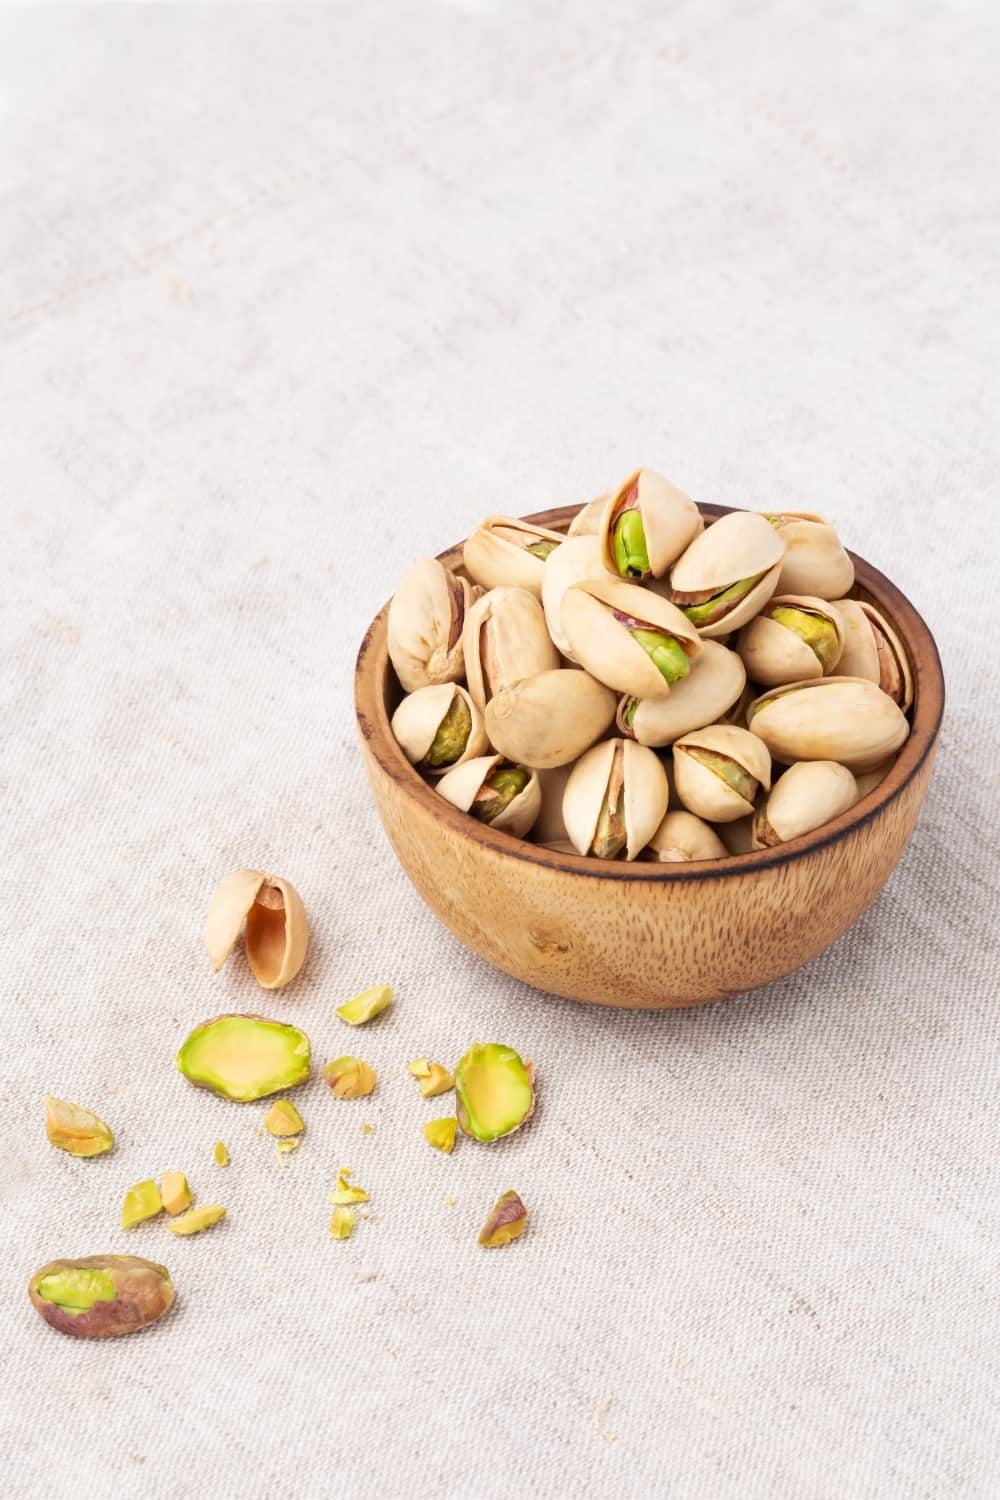 Pistachio in wooden bowl on linen table cloth background with copy space